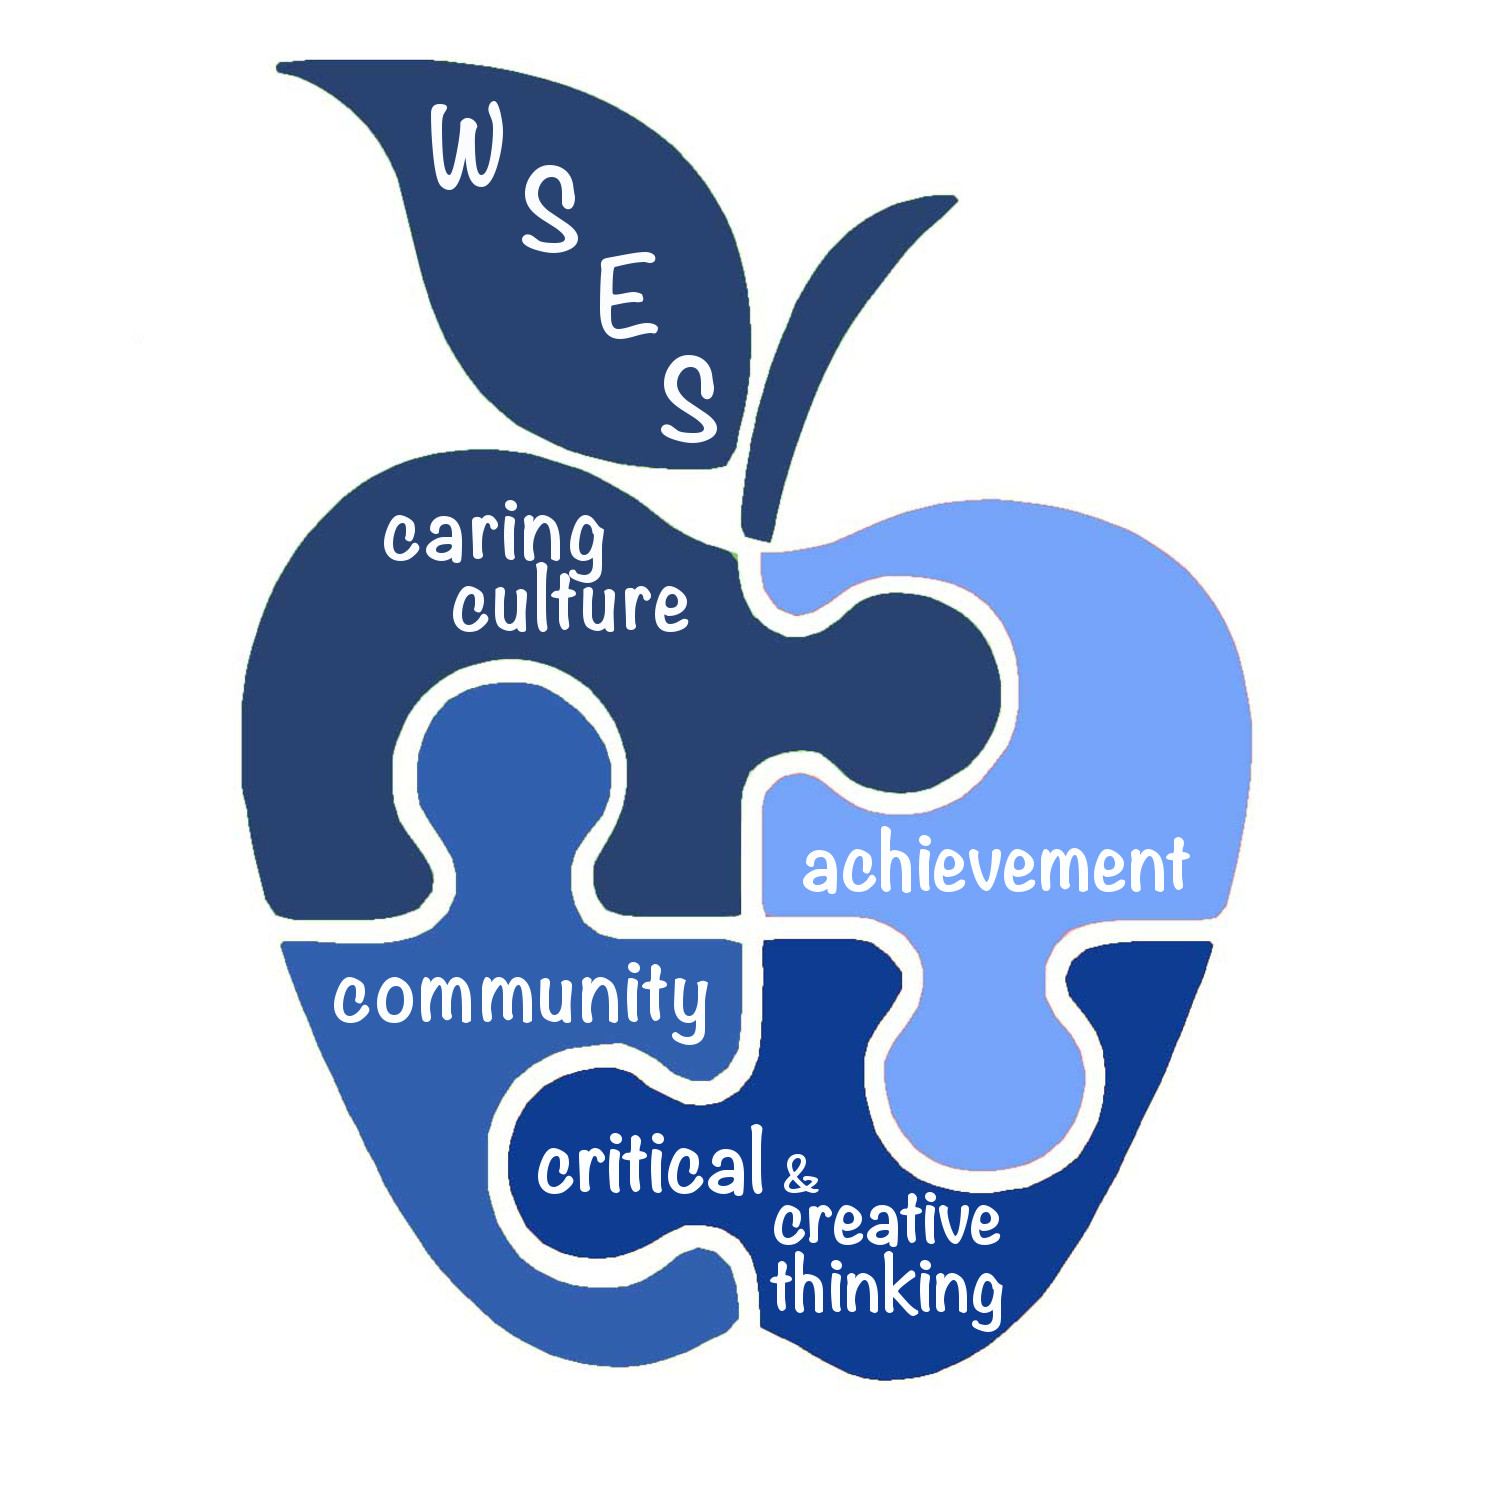 An apple divided into four connecting puzzle pieces- Caring Culture, Community, Achievement, and Critical & Creative Thinking